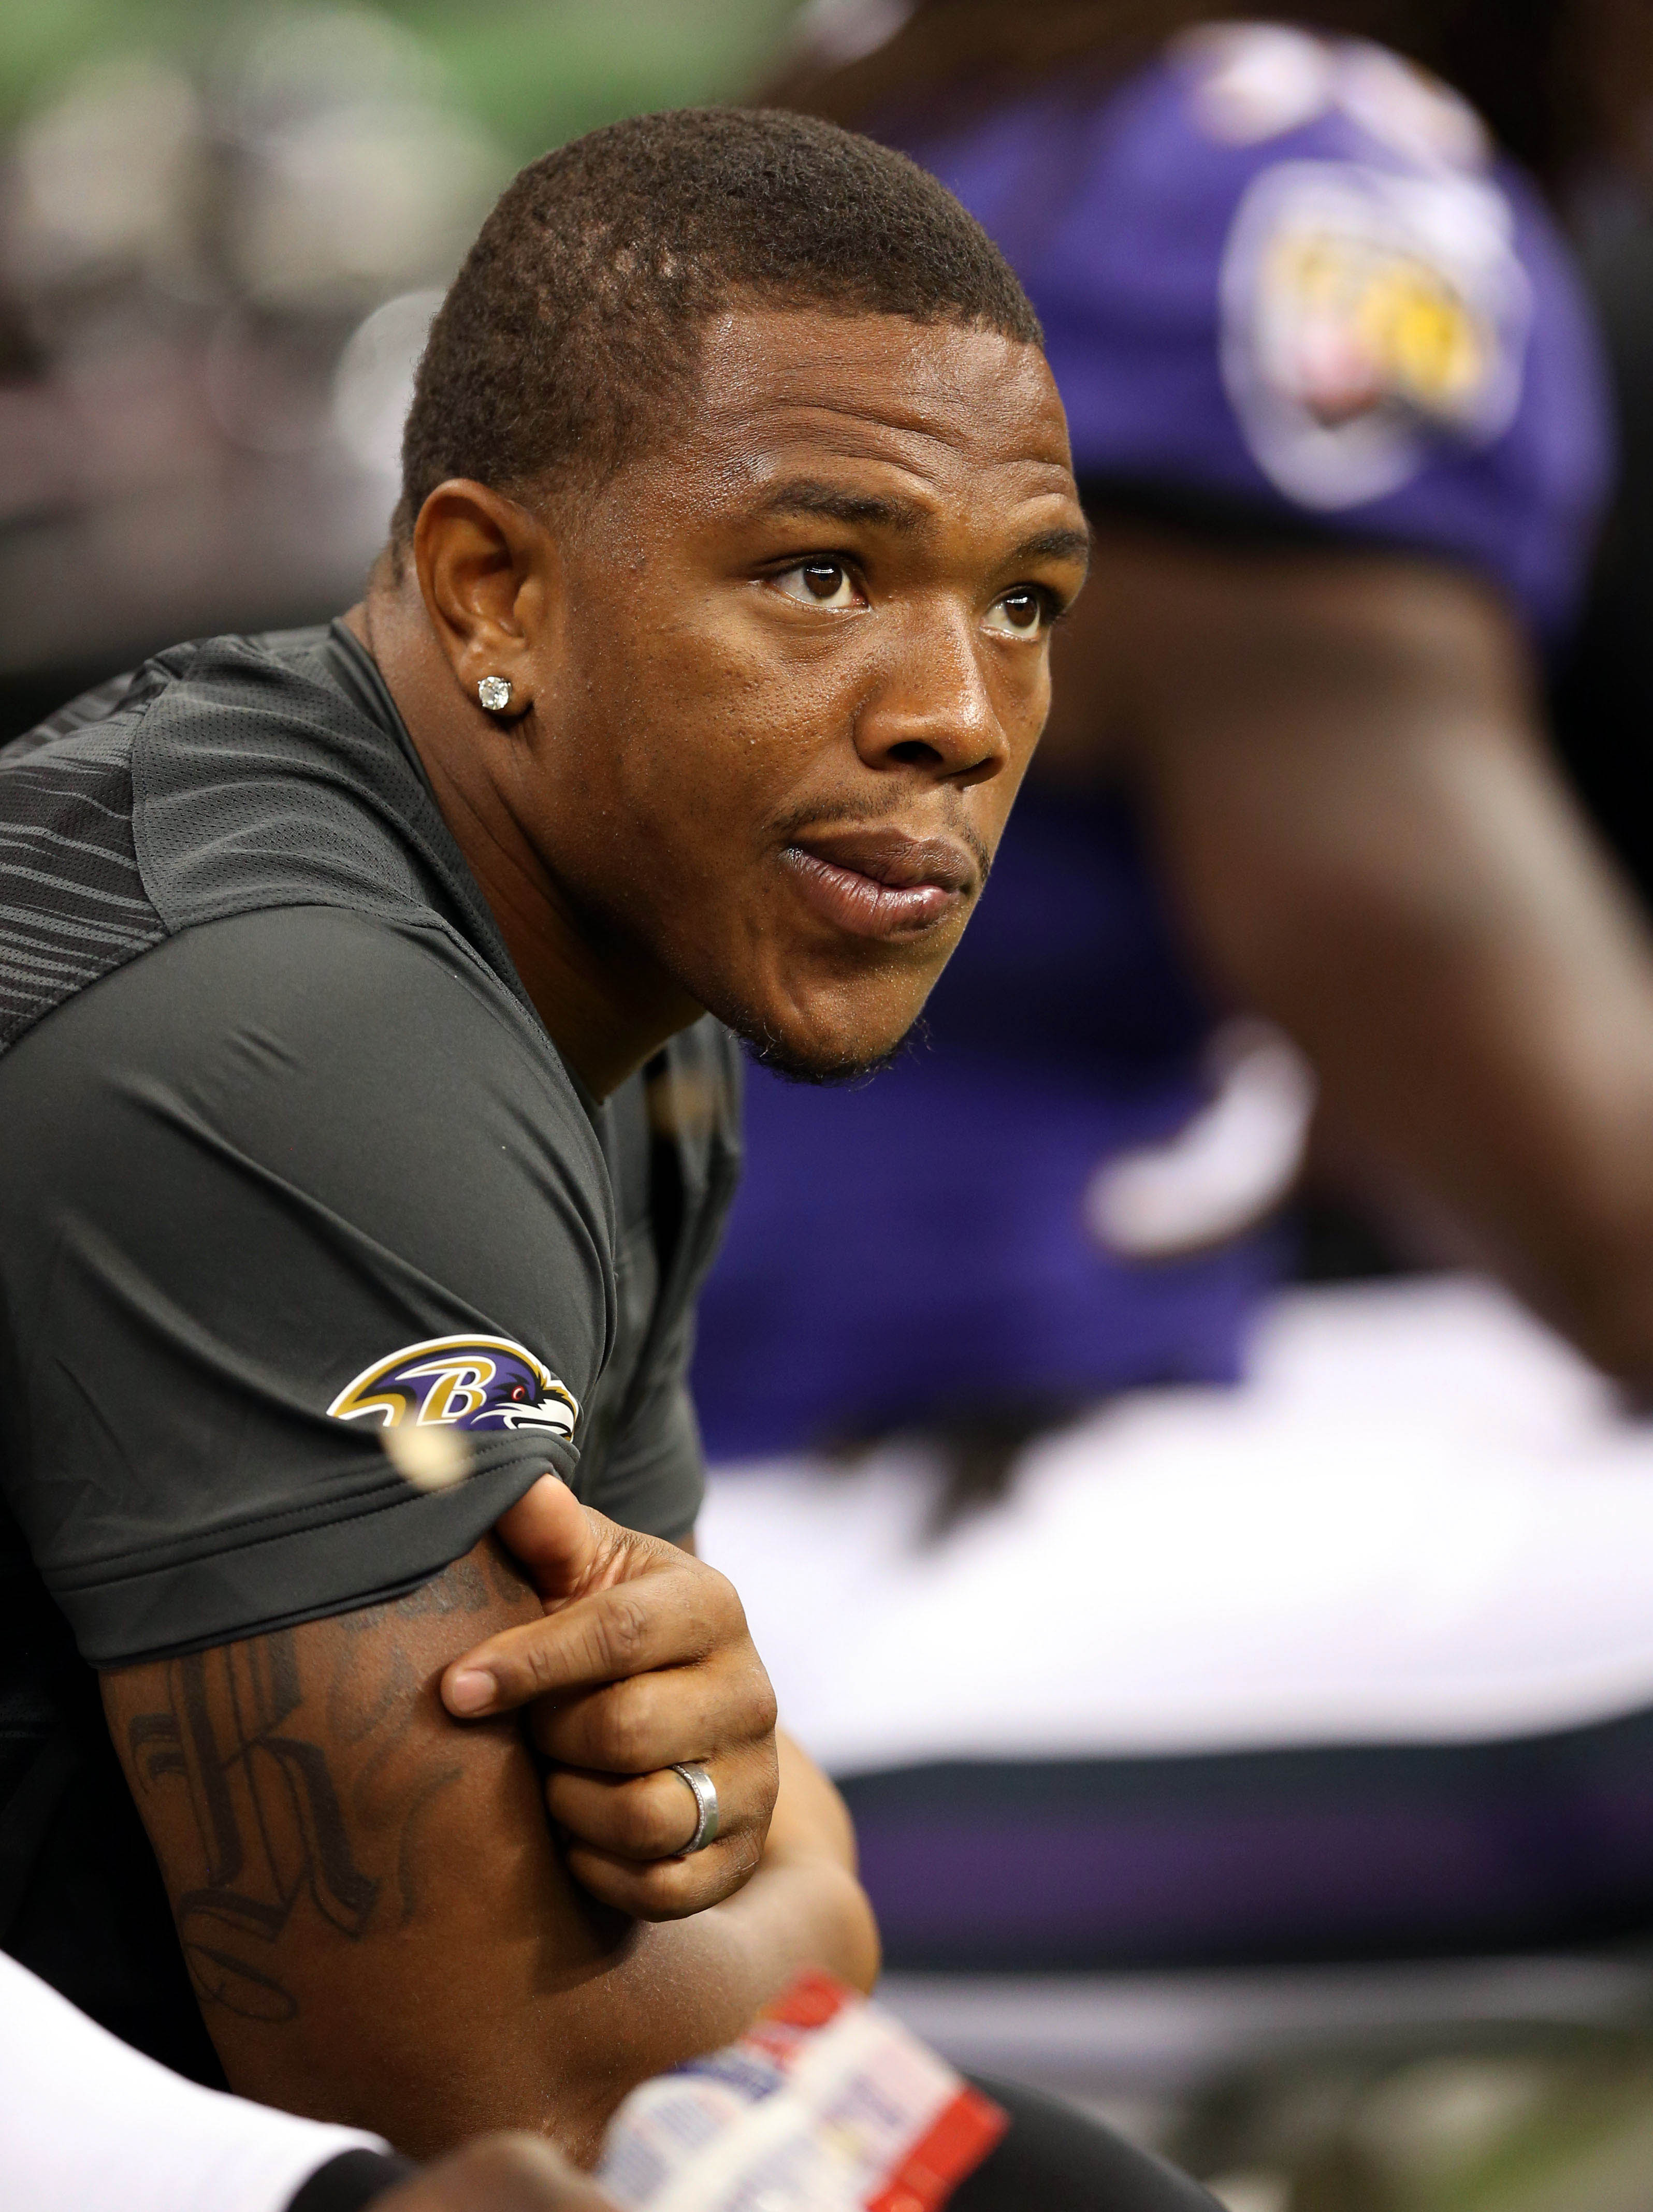 Ray Rice Ravens Jerseys: Fans Wear Them After Video of Domestic Abuse